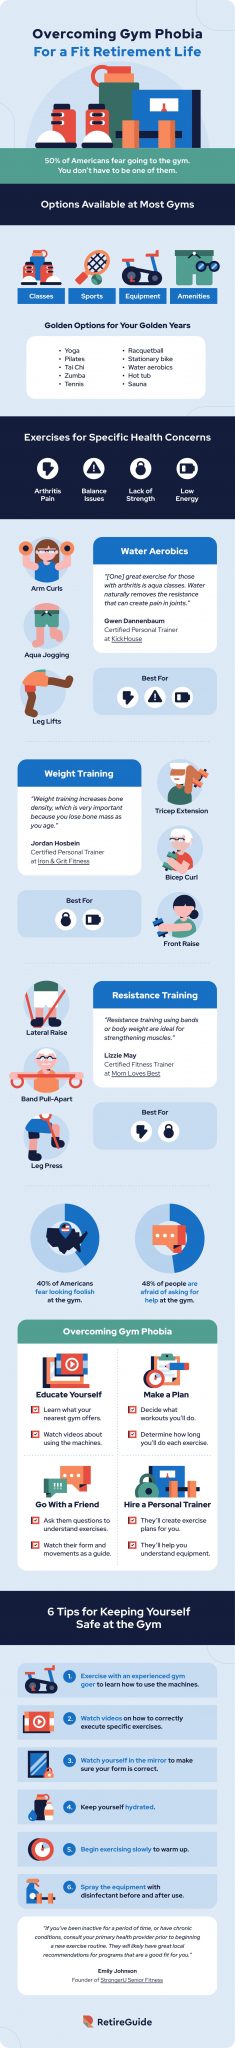 Infographic Tips for Overcoming Gym-Phobia to Stay Fit